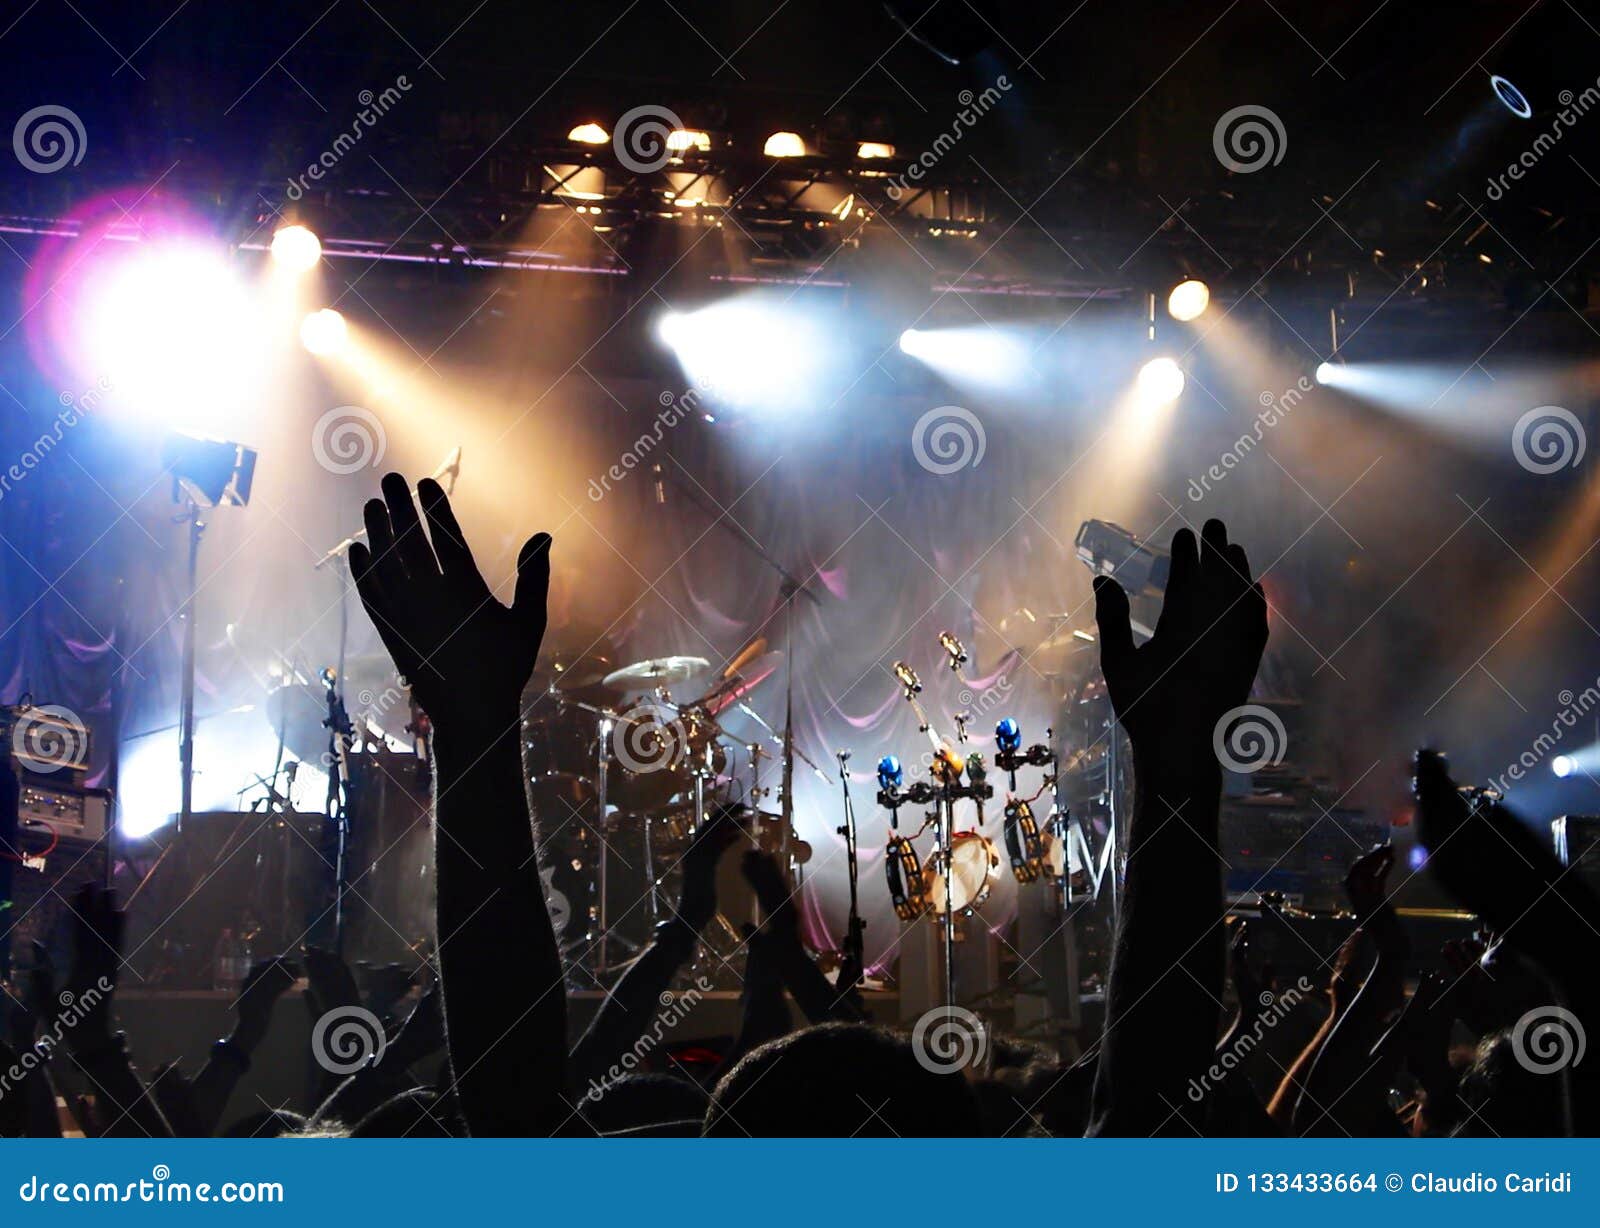 Live music show tonight editorial stock image. Image of live 133433664